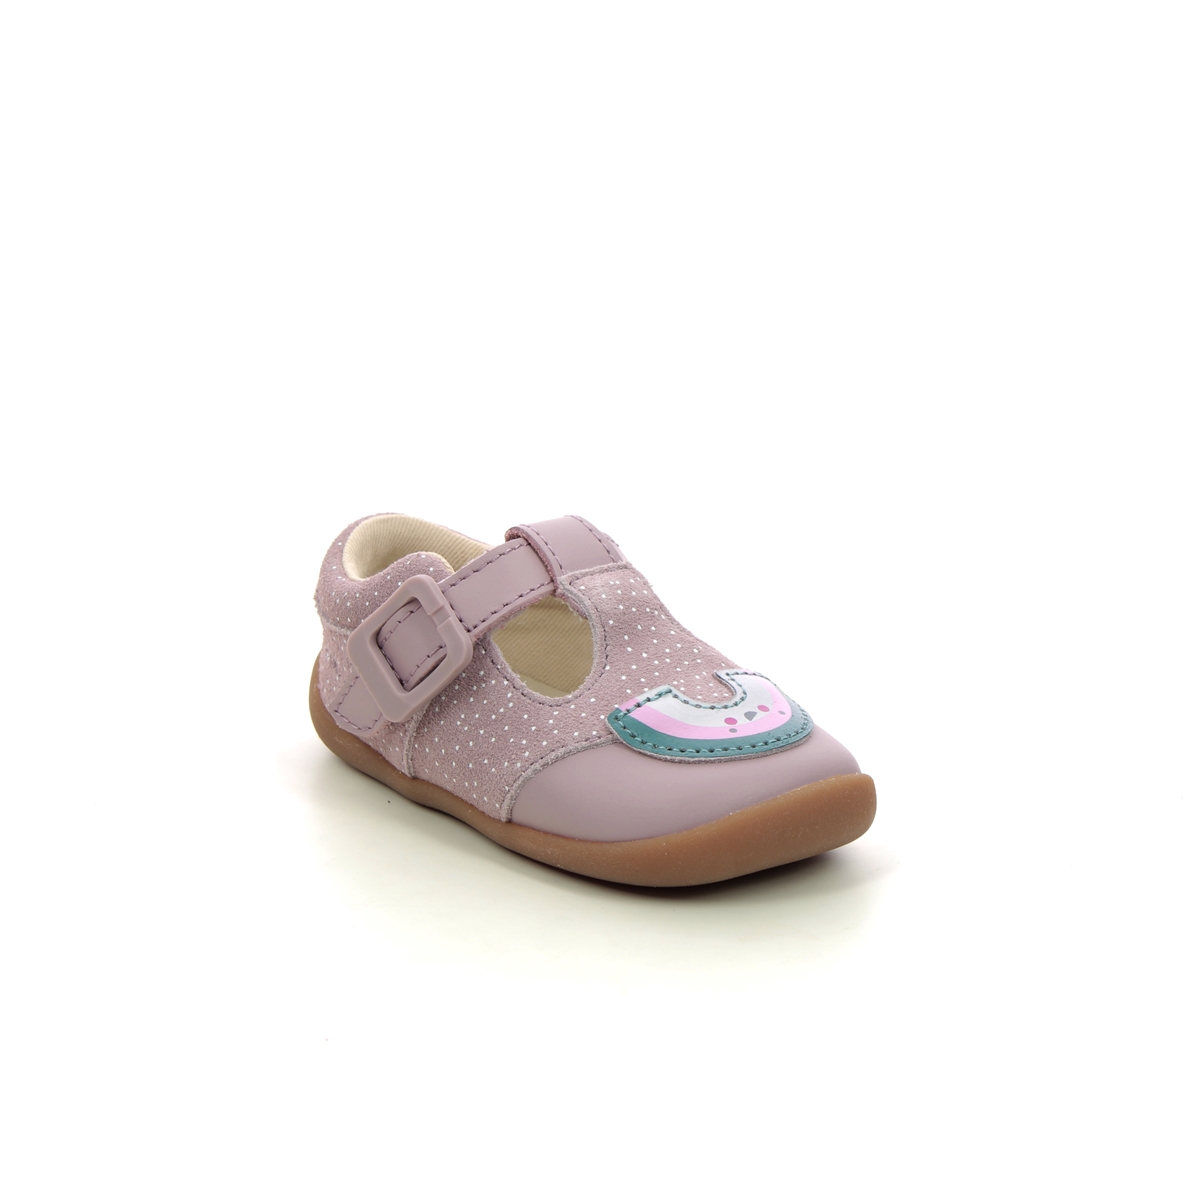 Clarks Roamer Mist T Pink Leather Kids girls first and baby shoes 7527-56F in a Plain Leather in Size 5